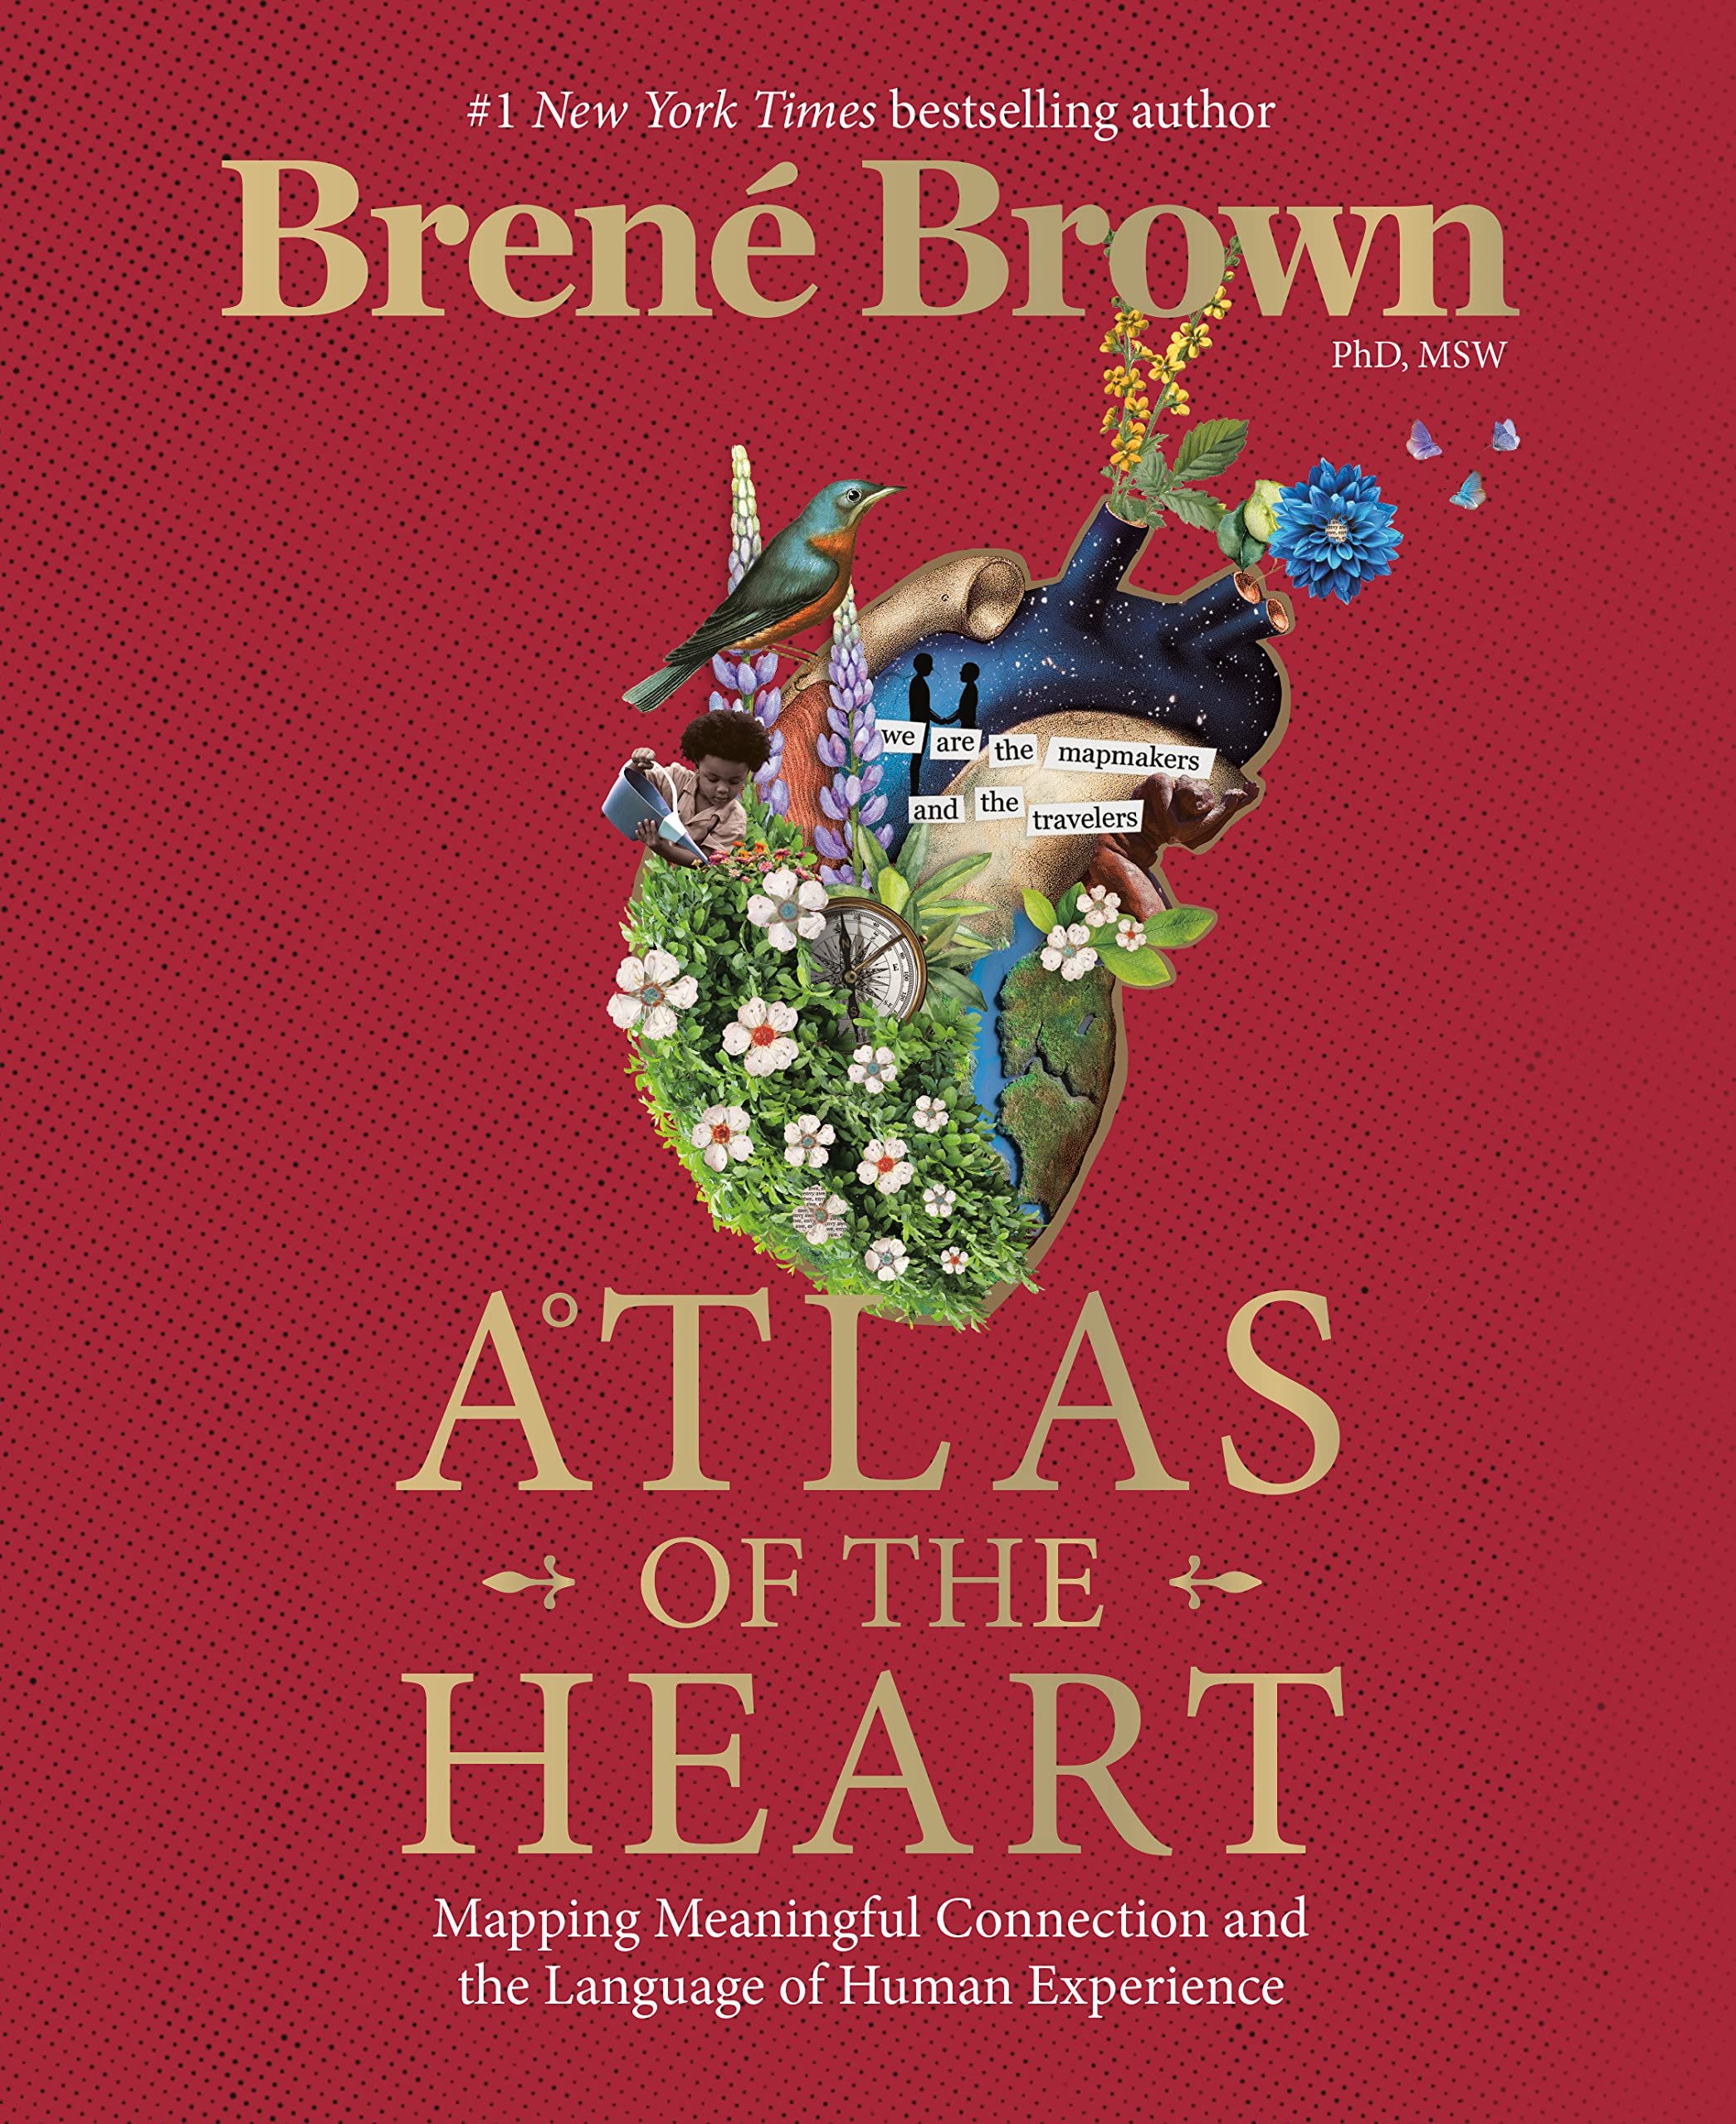 atlas of the heart book review